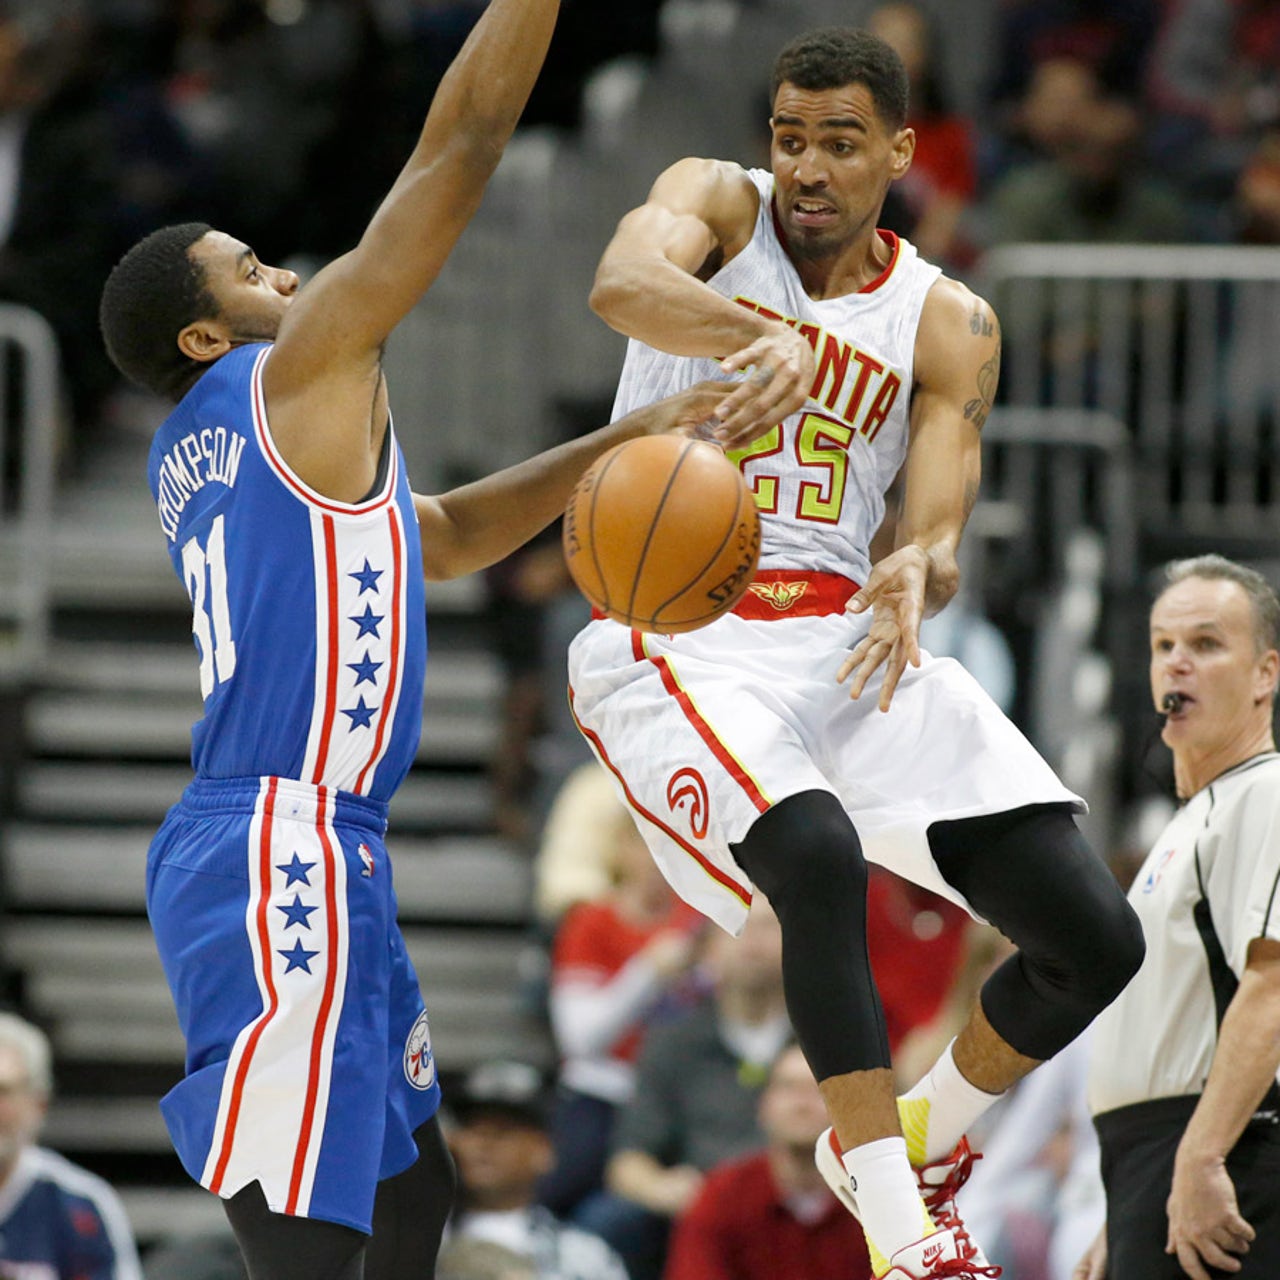 Thabo Sefolosha is the only NBA player to wear this iconic Nike